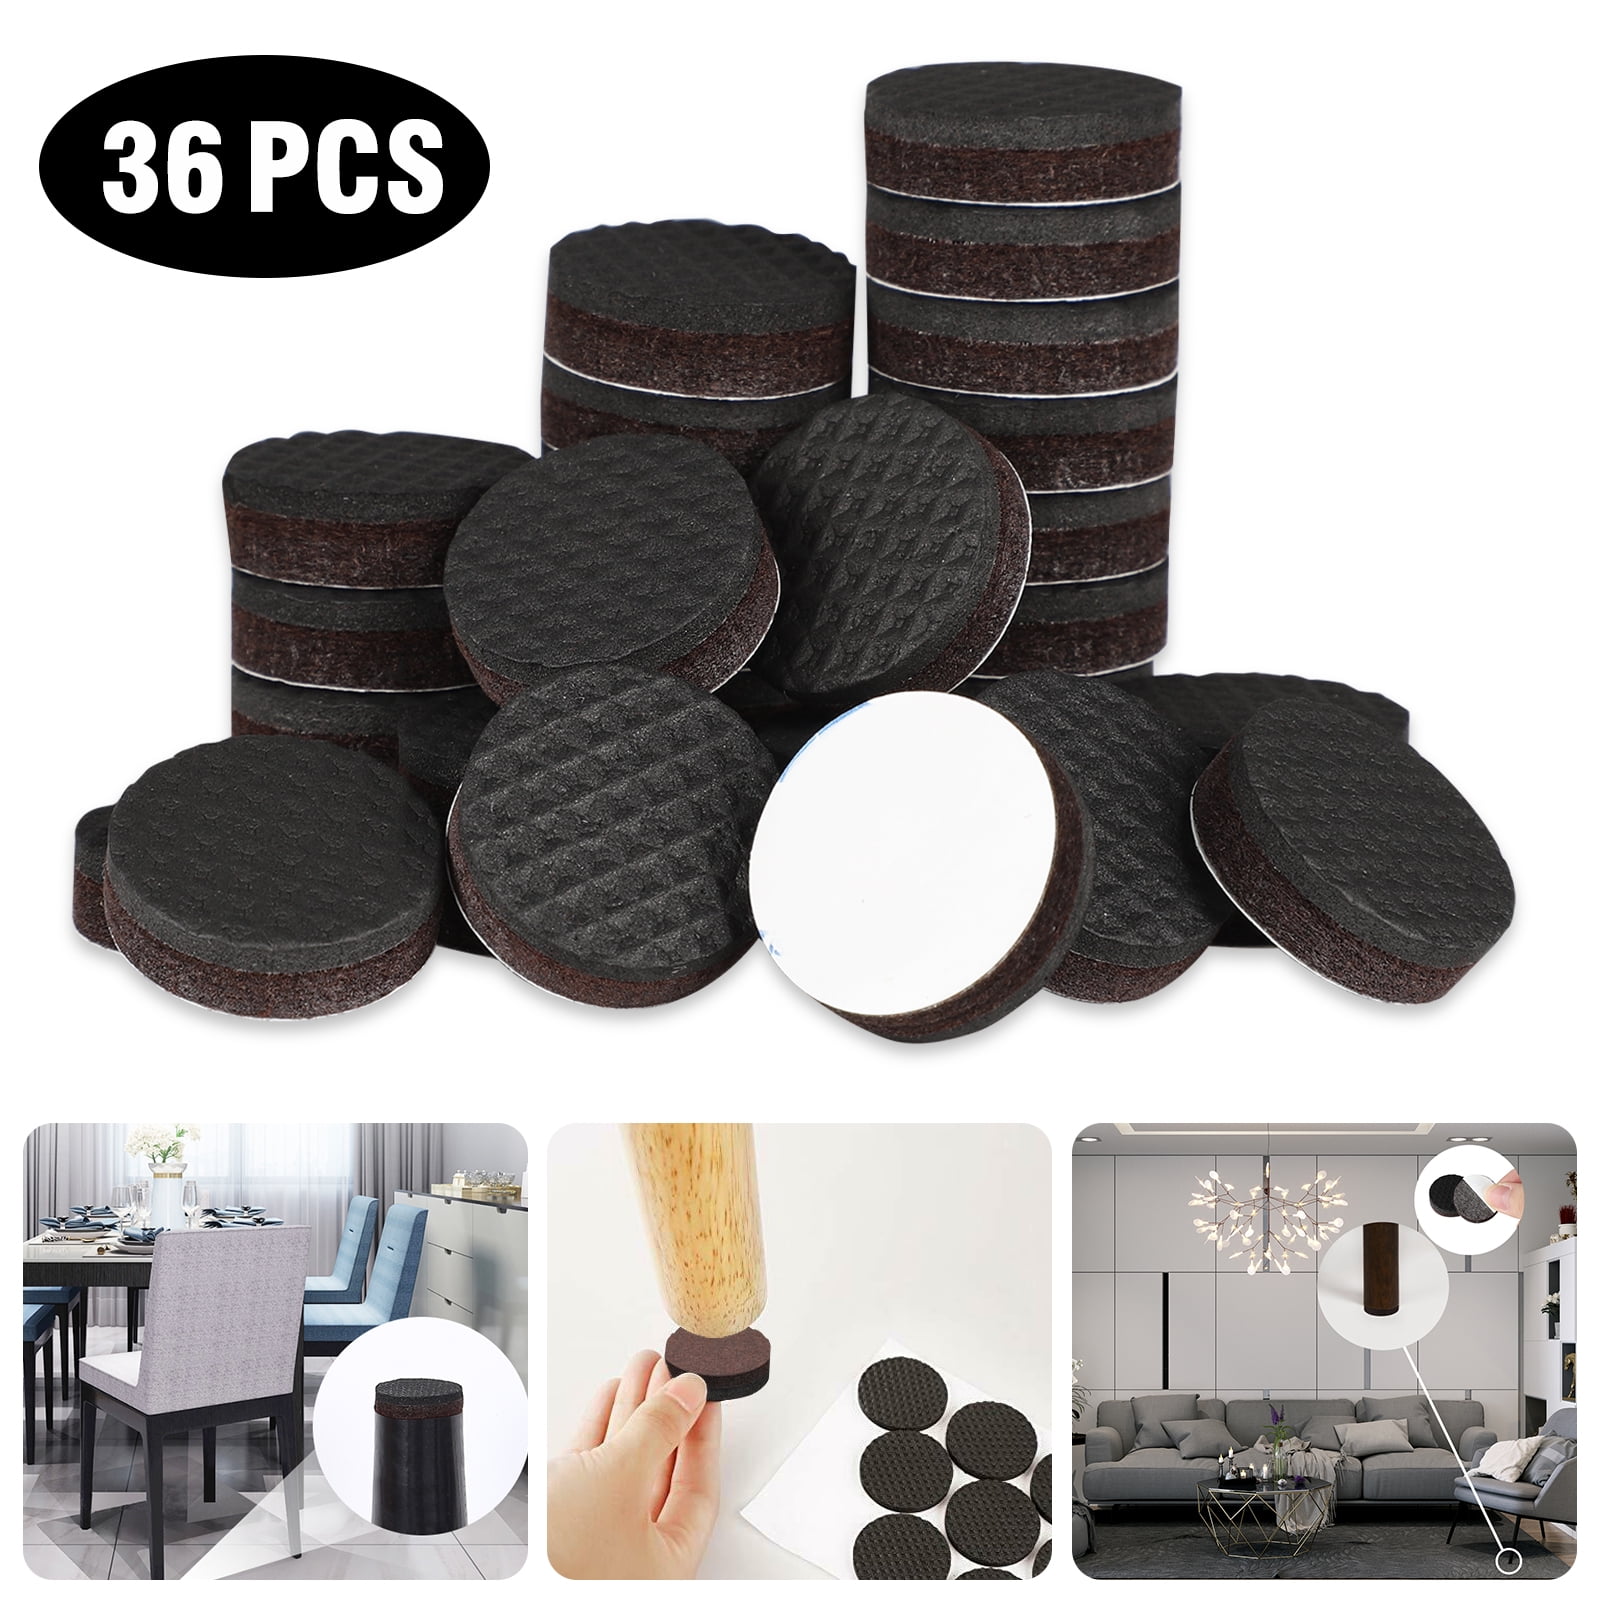 28 pc Anti Skid Furniture Protection Pads Rubber Self Adhesive Scratch Protector 